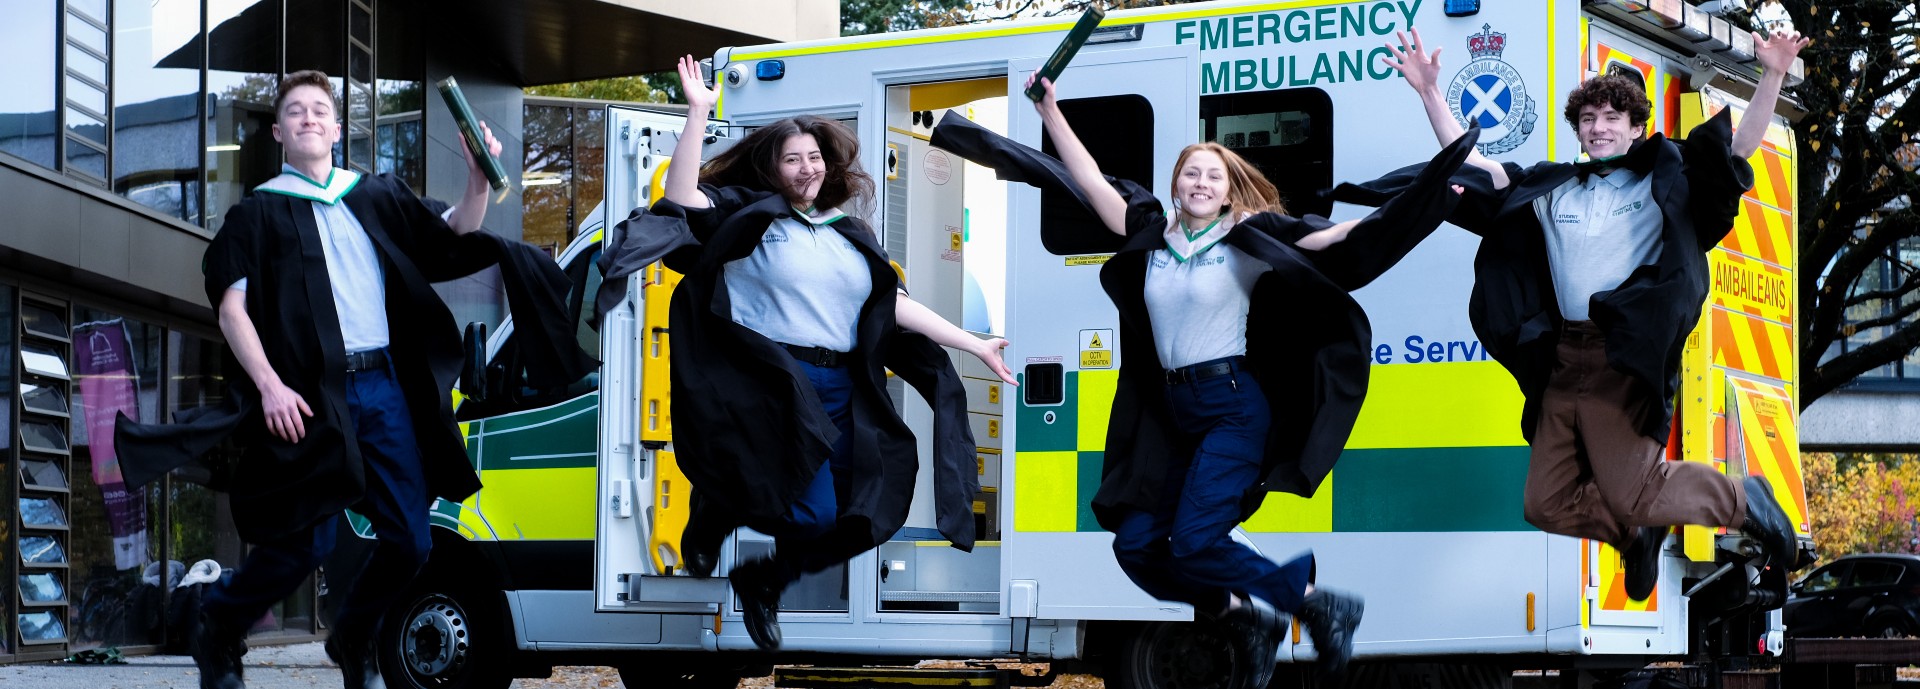 Paramedic graduates leap in front of ambulance